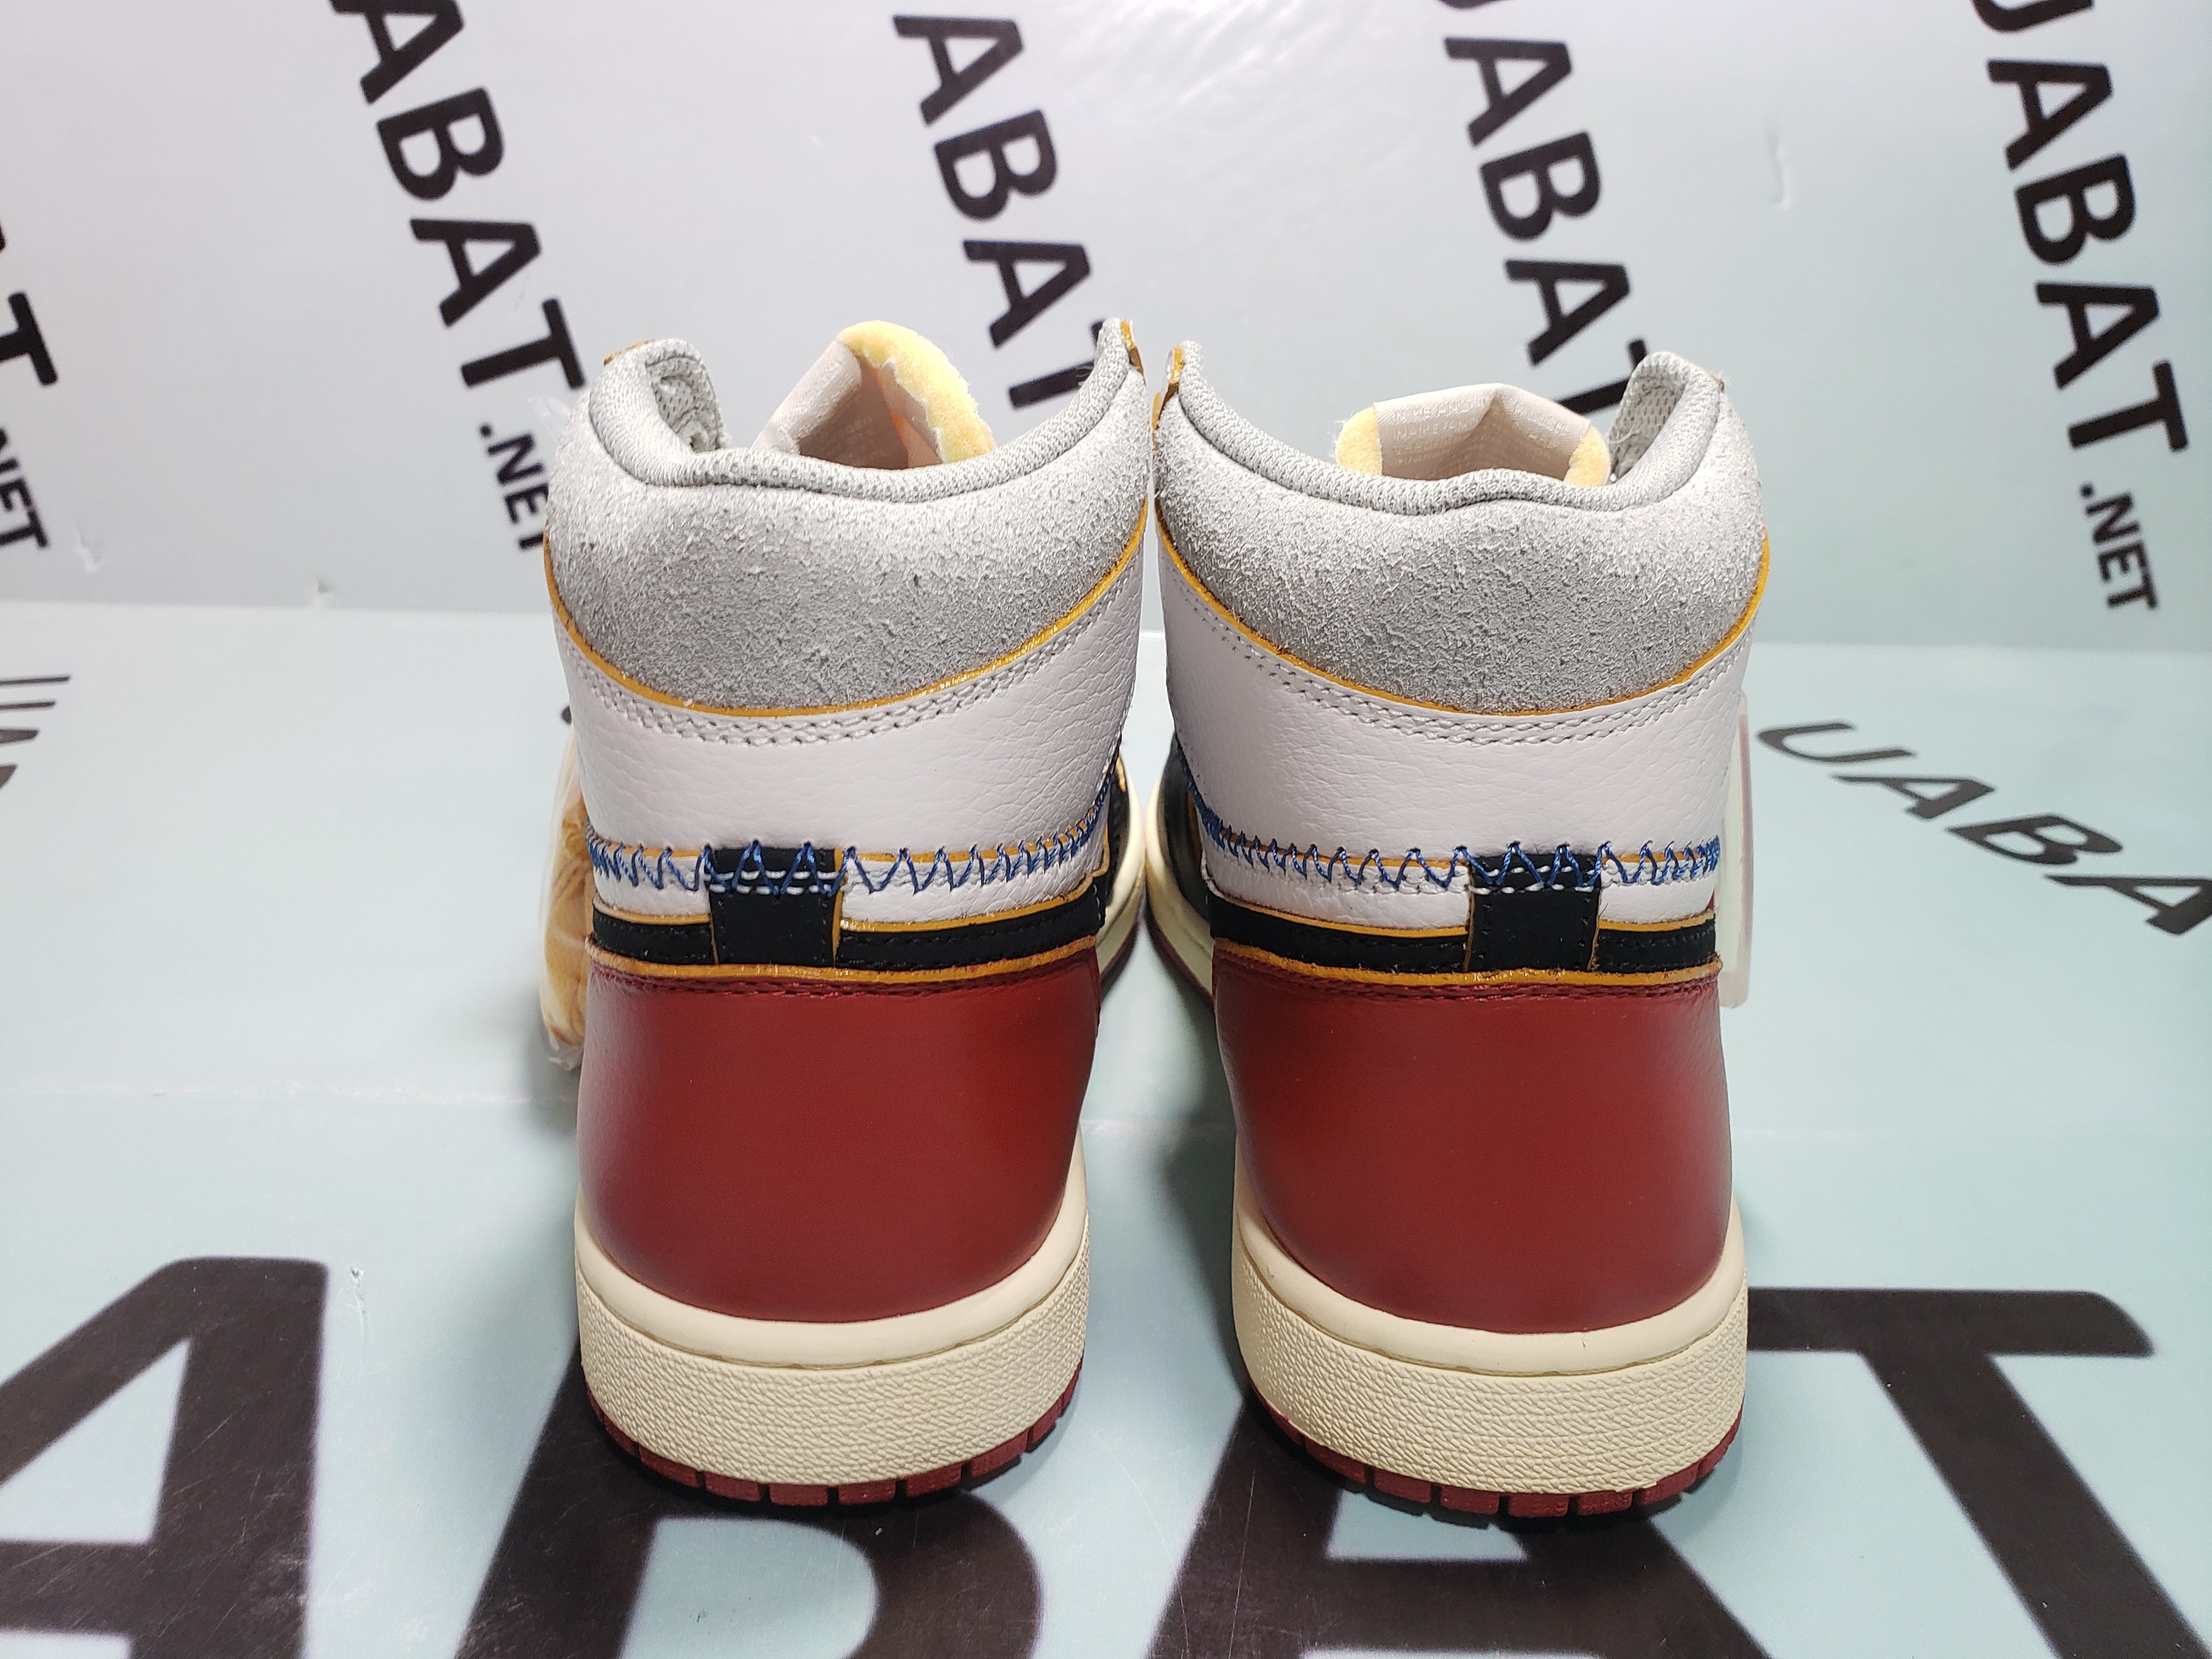 Check out the larger image below along with another Air Jordan AJ1 4 PE